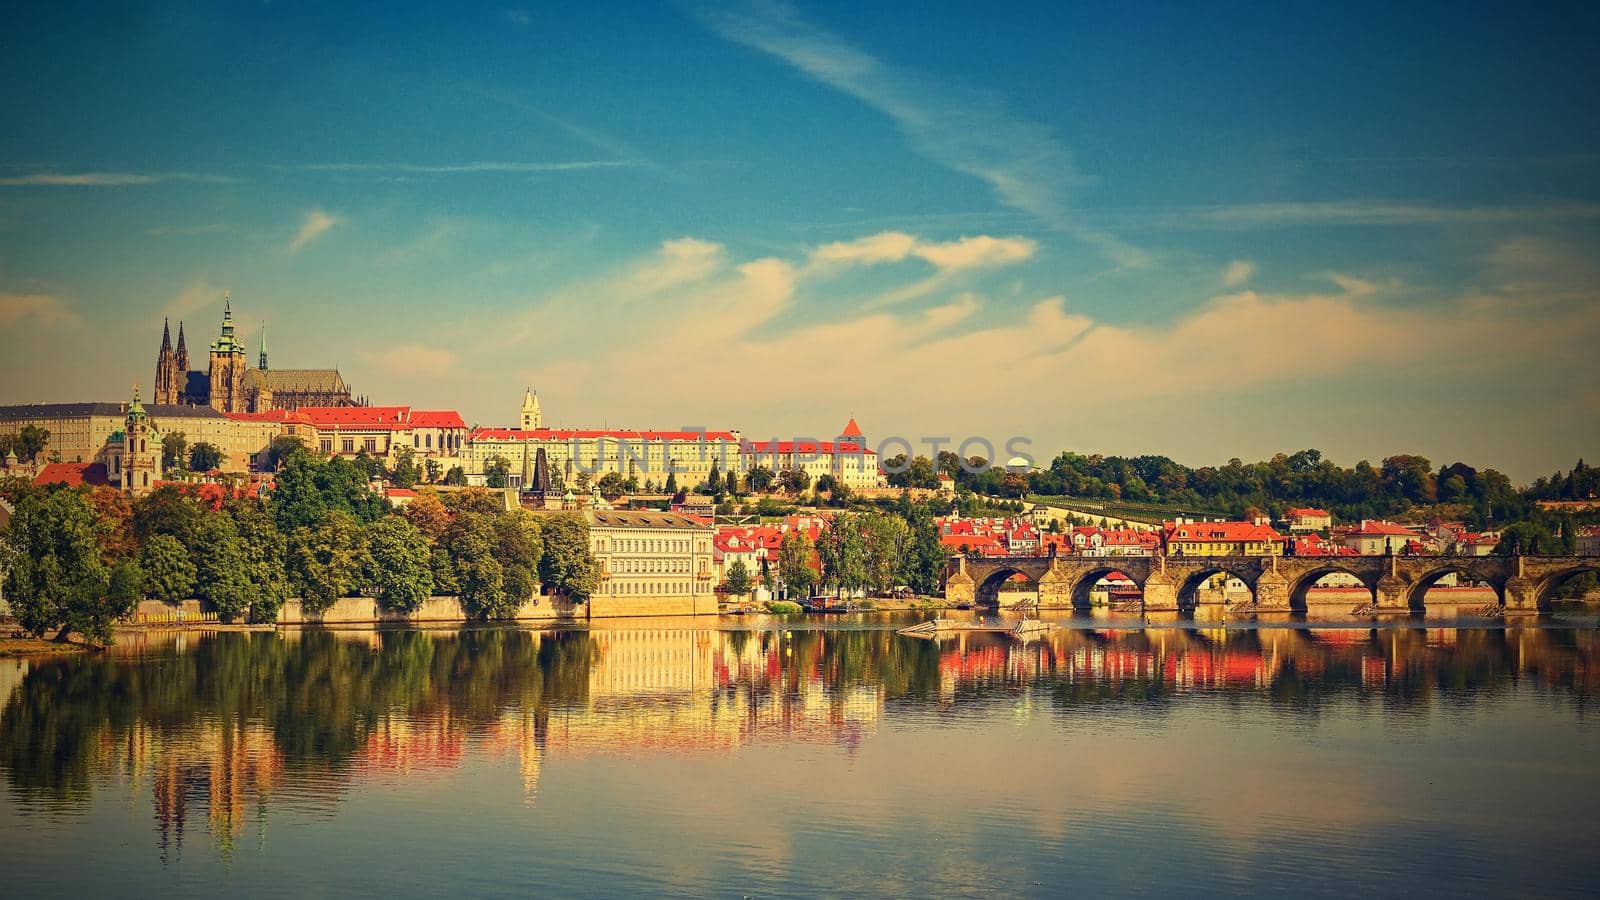 Prague, capital of the Czech Republic. Scenic sunset view of the Old Town pier architecture and Charles Bridge over Vltava river. 